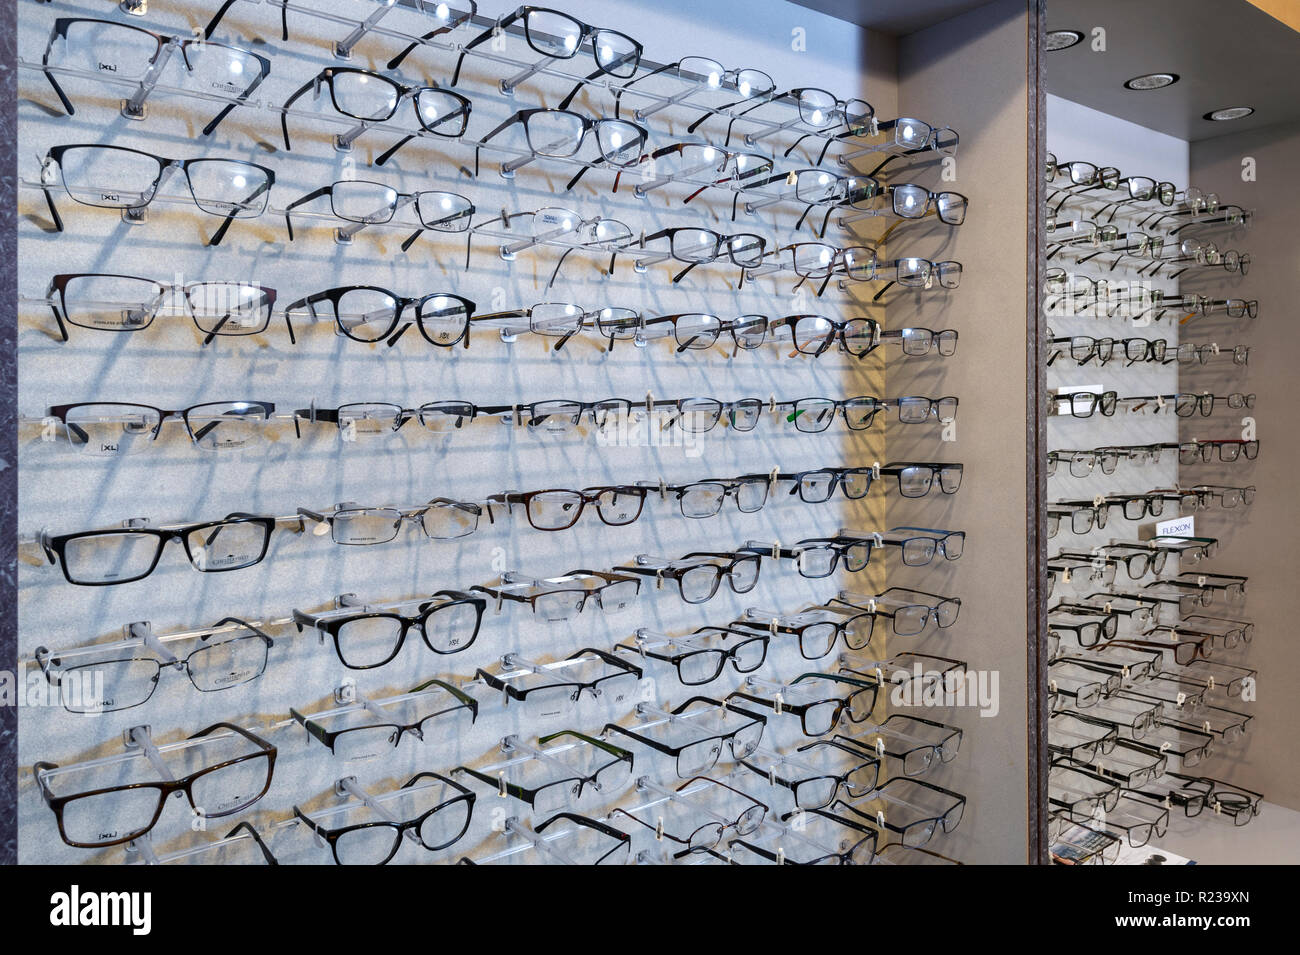 Eye Glasses Display High Resolution Stock Photography and Images - Alamy